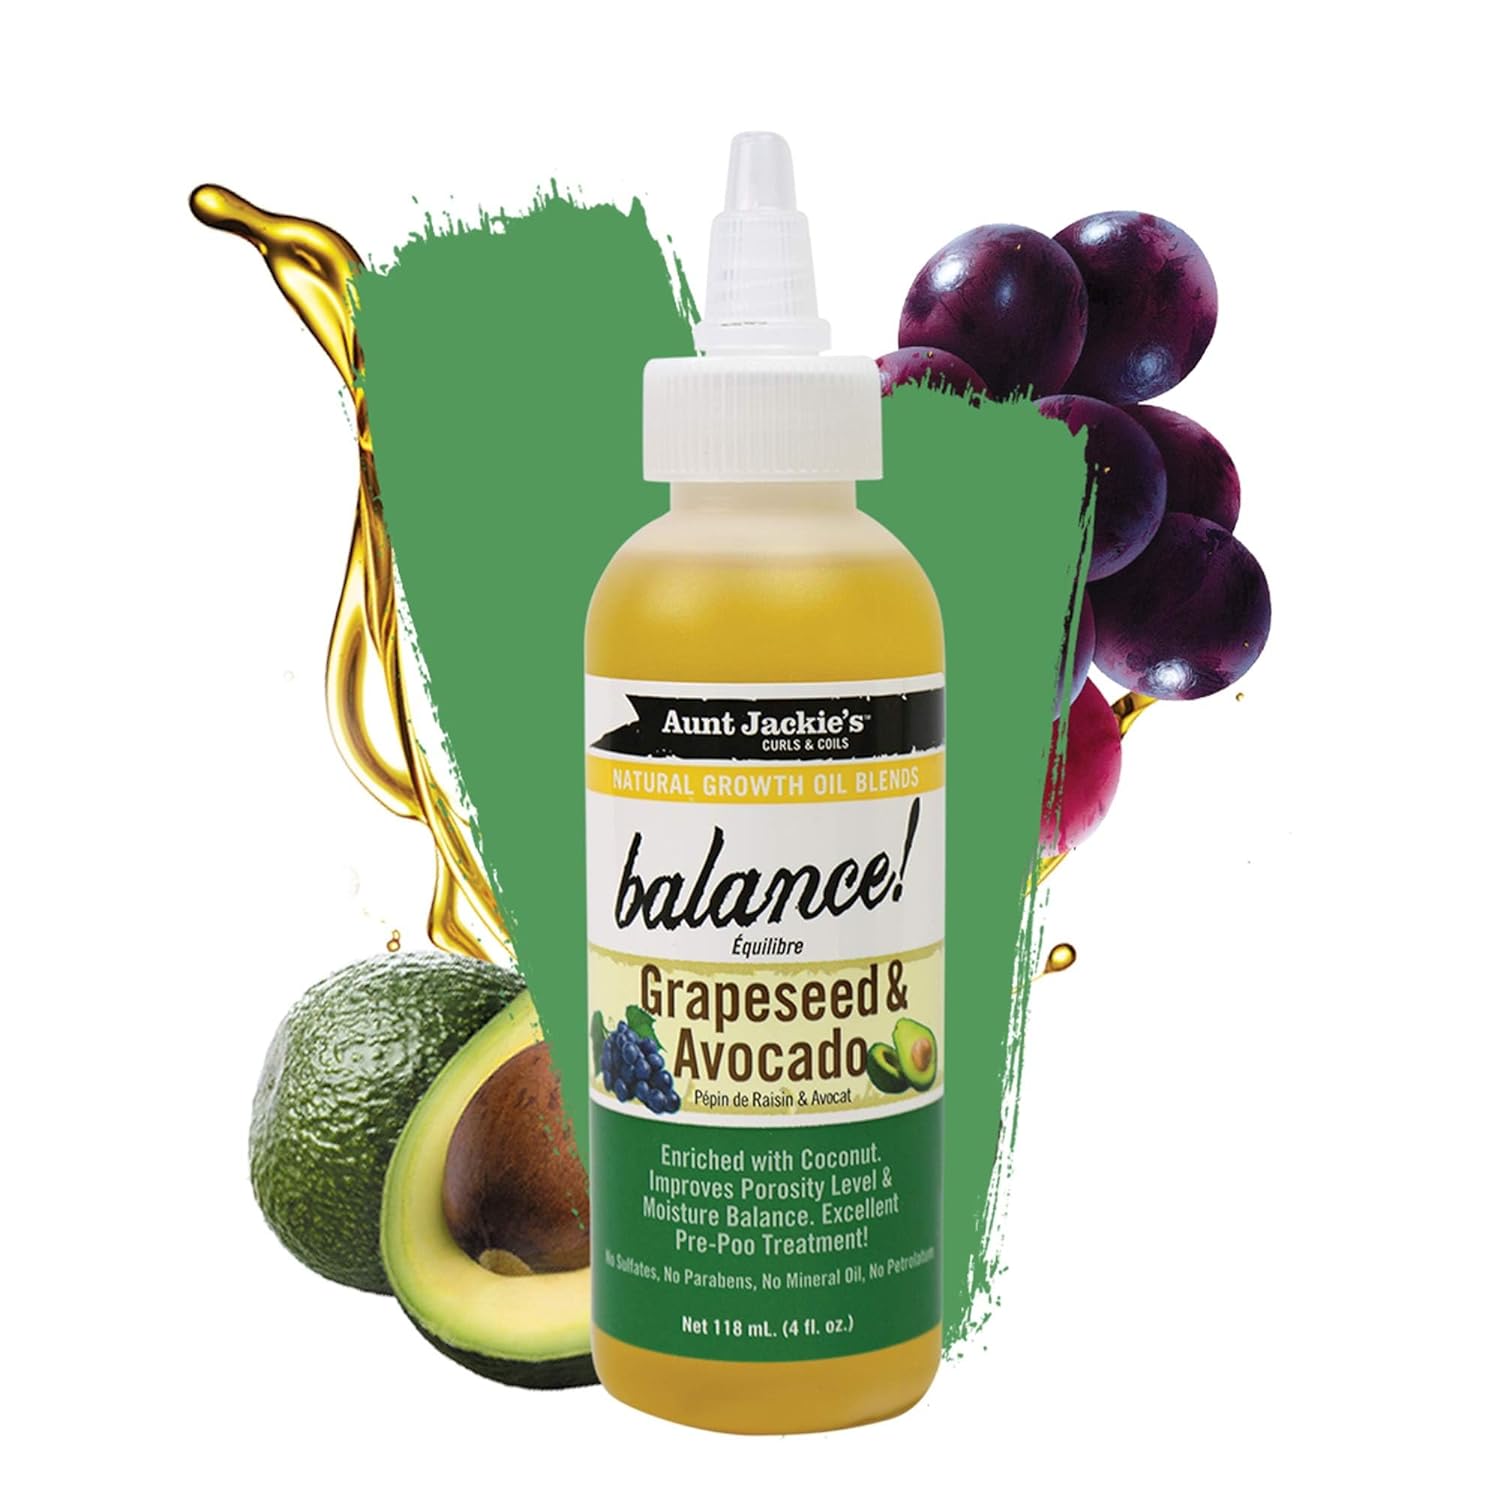 Aunt Jackie's Natural Growth Oil Blends Balance - Grapeseed and Avocado, Pre-Shampoo Treatment, Improves Porosity and Moisture Balance, 4 oz : Beauty & Personal Care